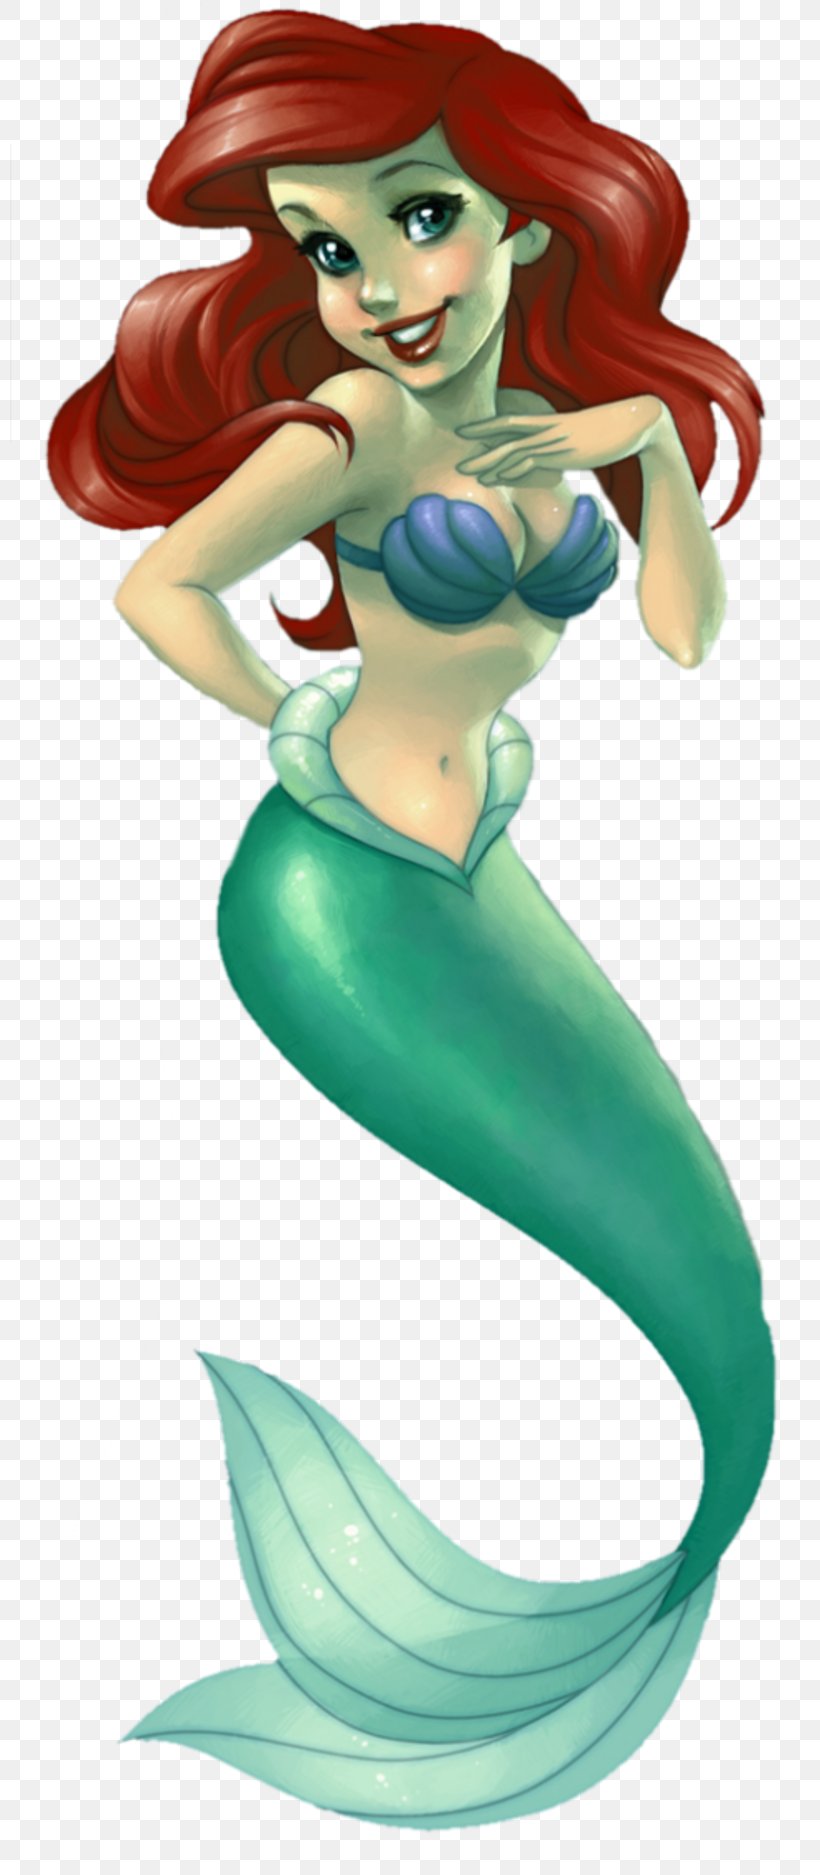 The Little Mermaid Ariel Diary Animation, PNG, 800x1875px, Little Mermaid, Animation, Ariel, Art, Blog Download Free